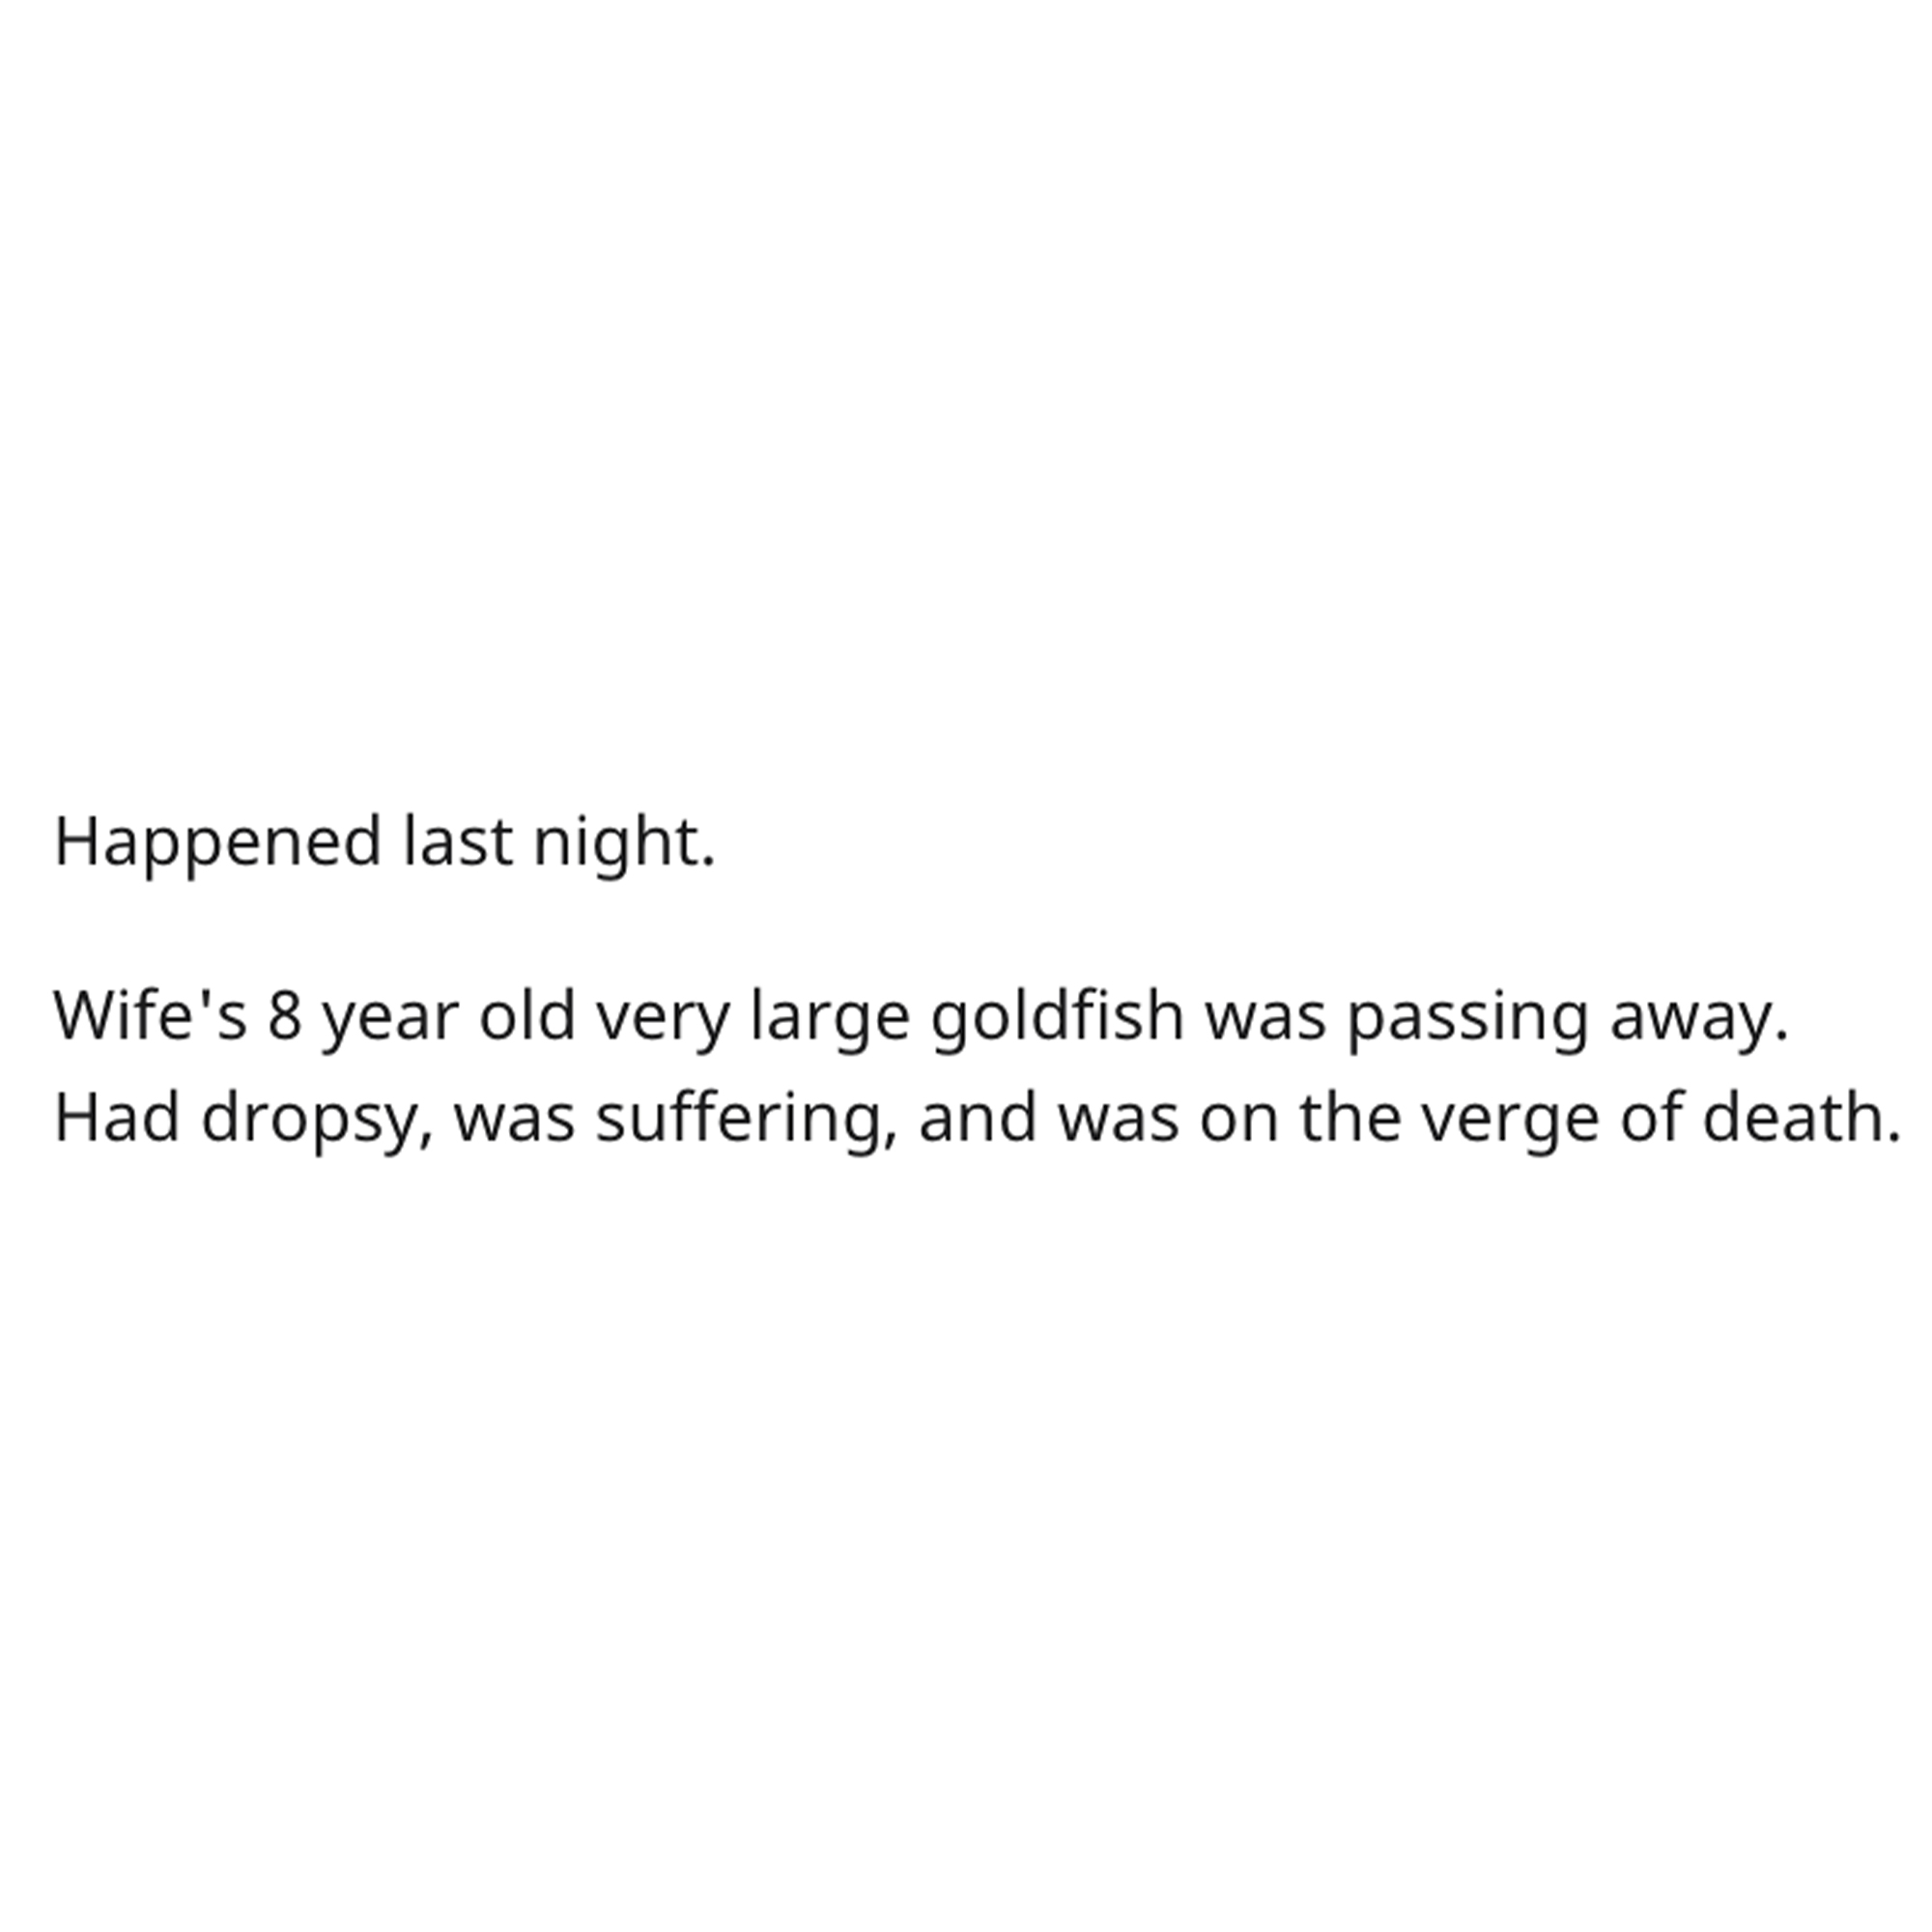 goldfish story - available - Happened last night. Wife's 8 year old very large goldfish was passing away. Had dropsy, was suffering, and was on the verge of death.